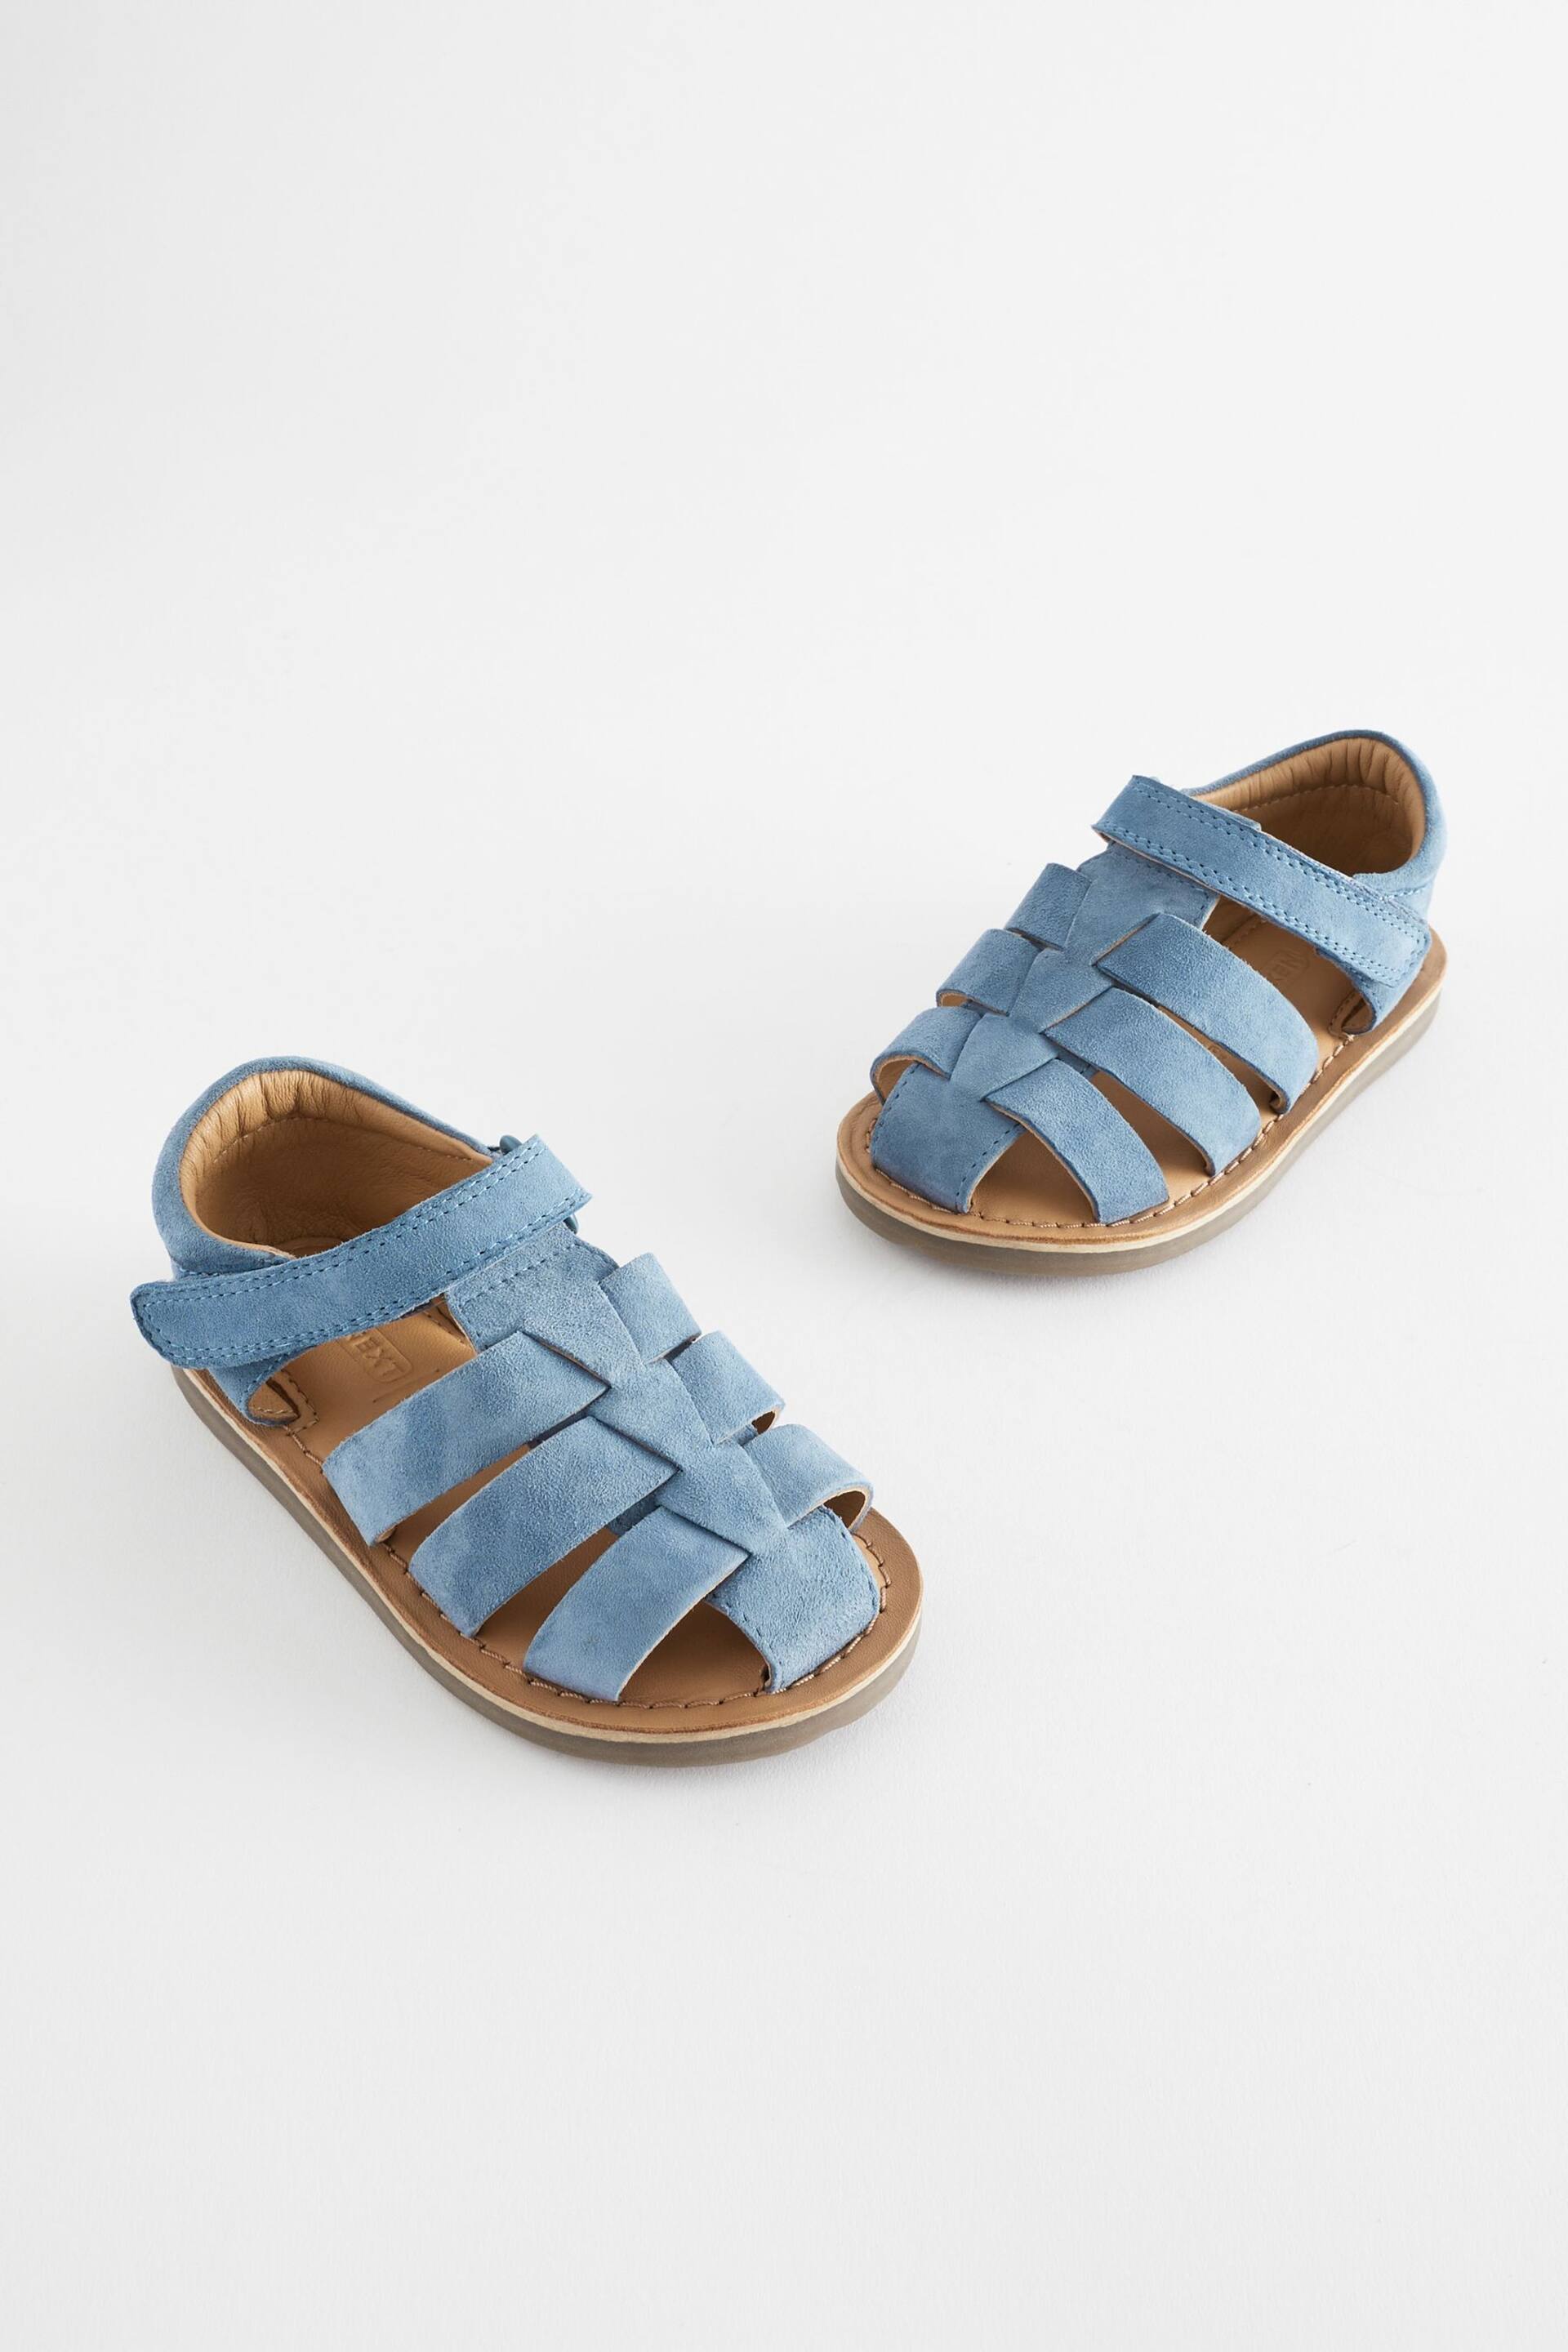 Blue Leather Closed Toe Touch Fastening Sandals - Image 1 of 7